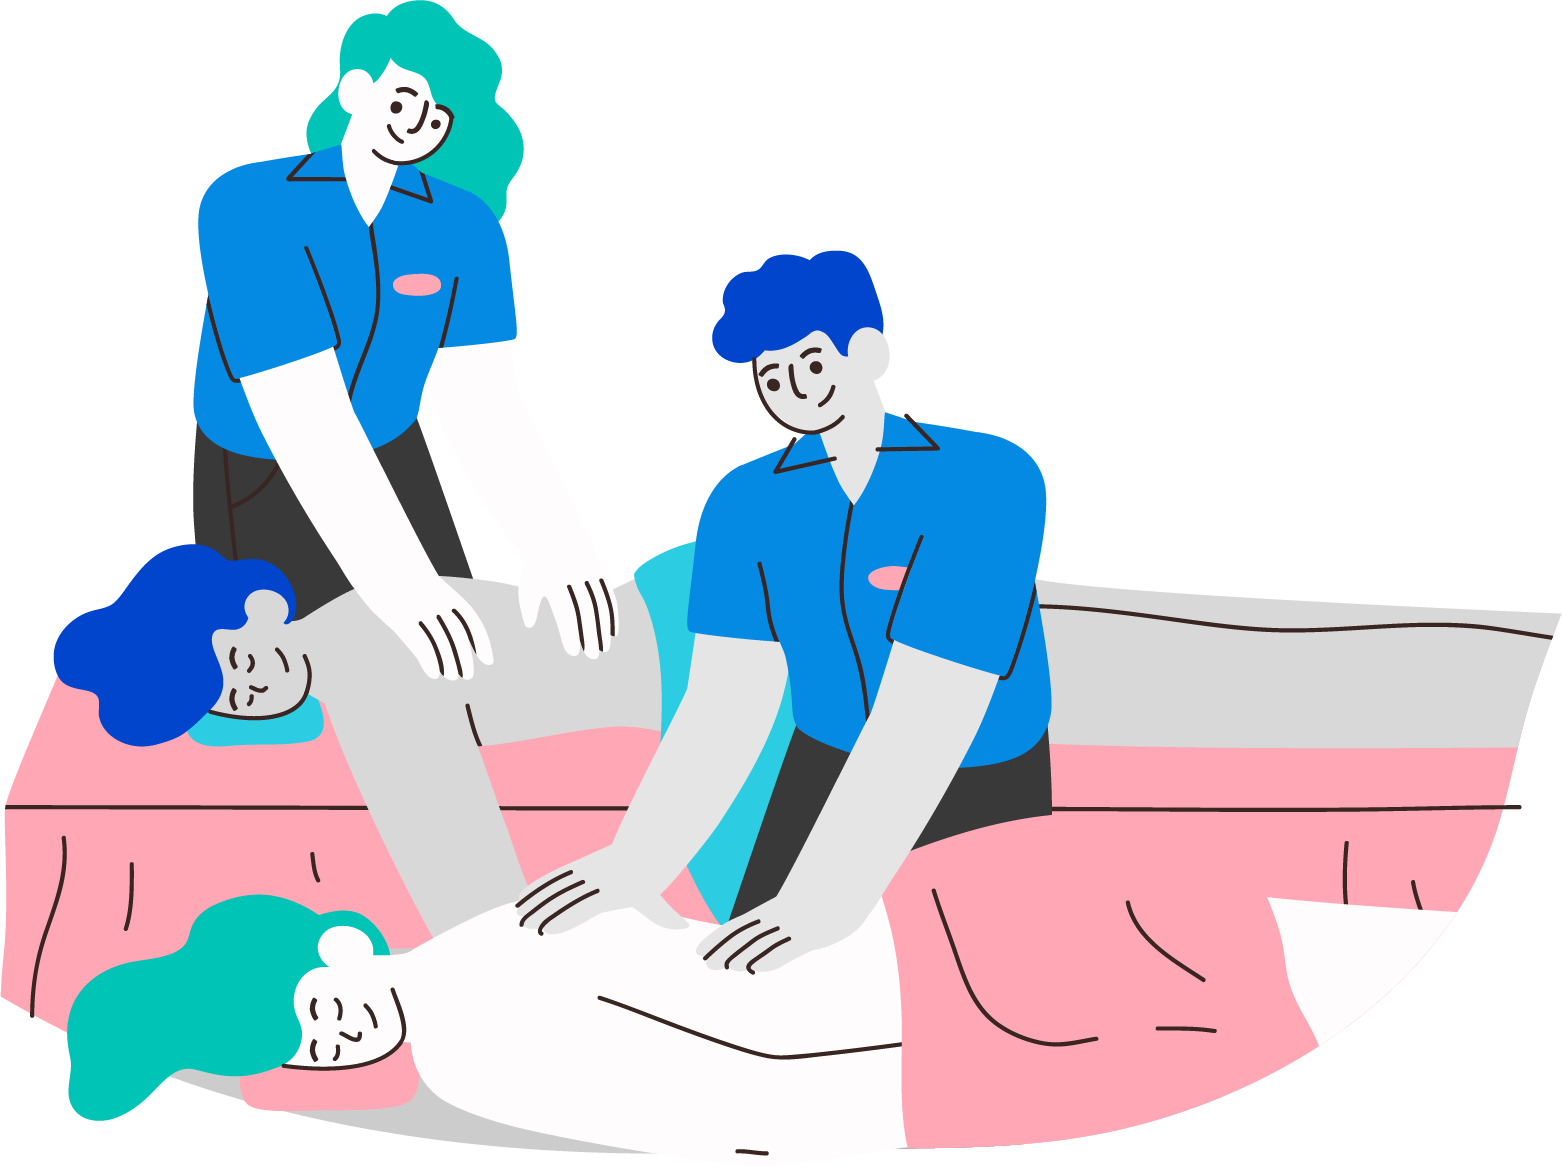 Spa_day_competition_illustration